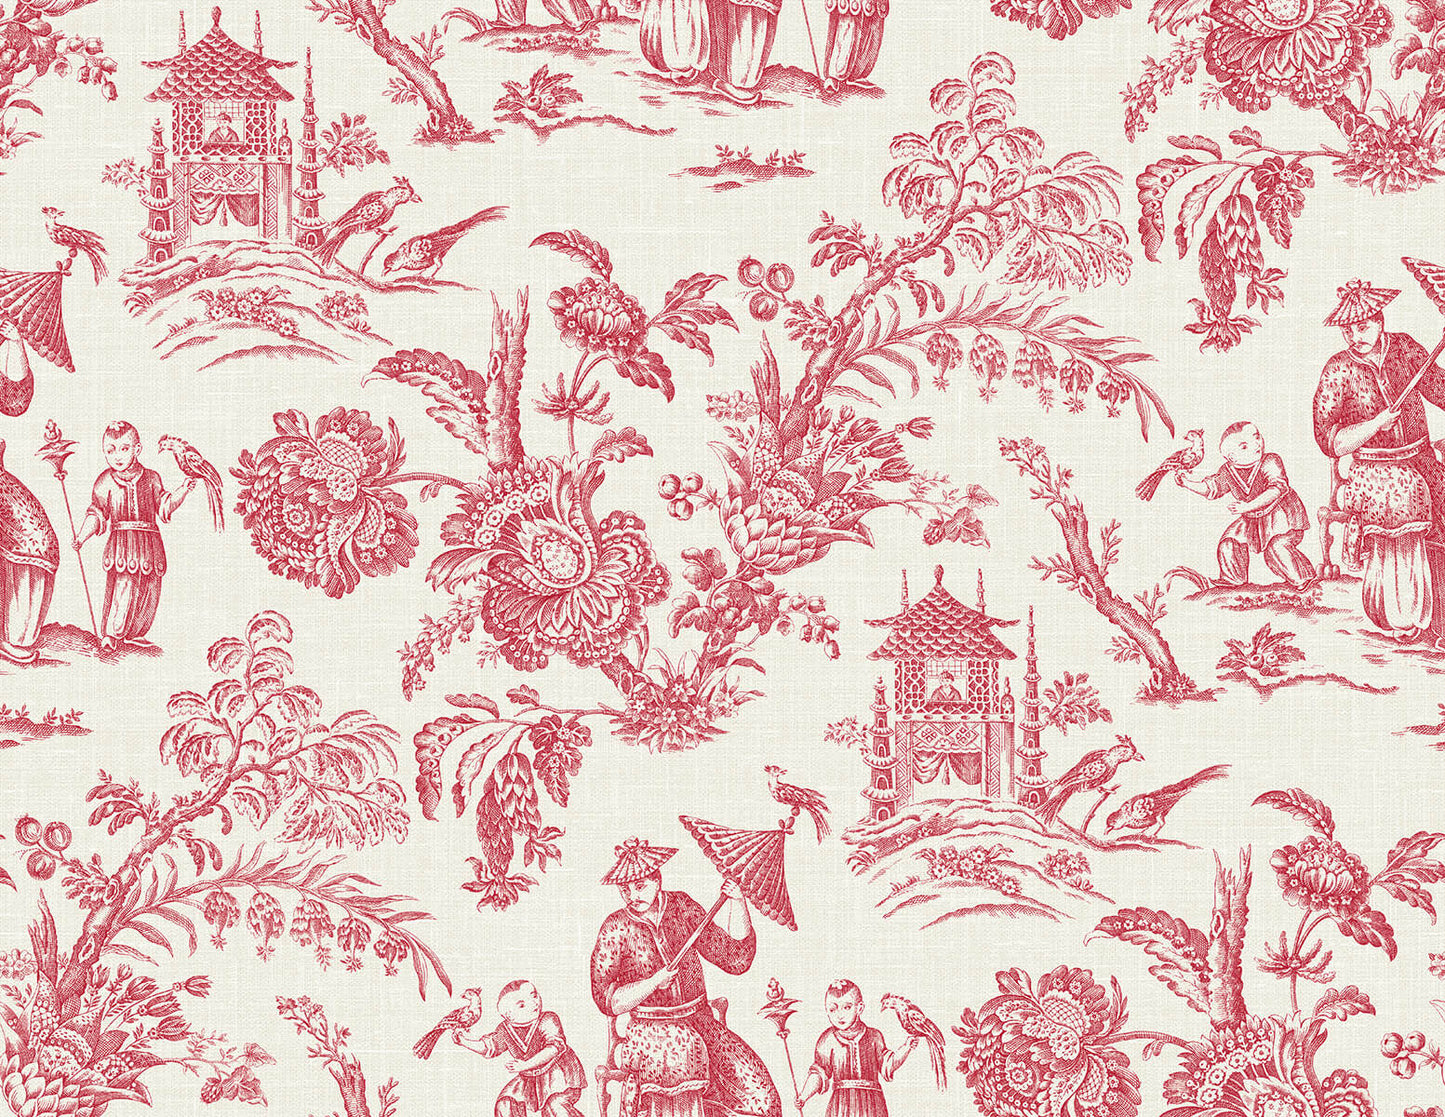 Seabrook Designs French Country Wallpaper Collection - SAMPLE